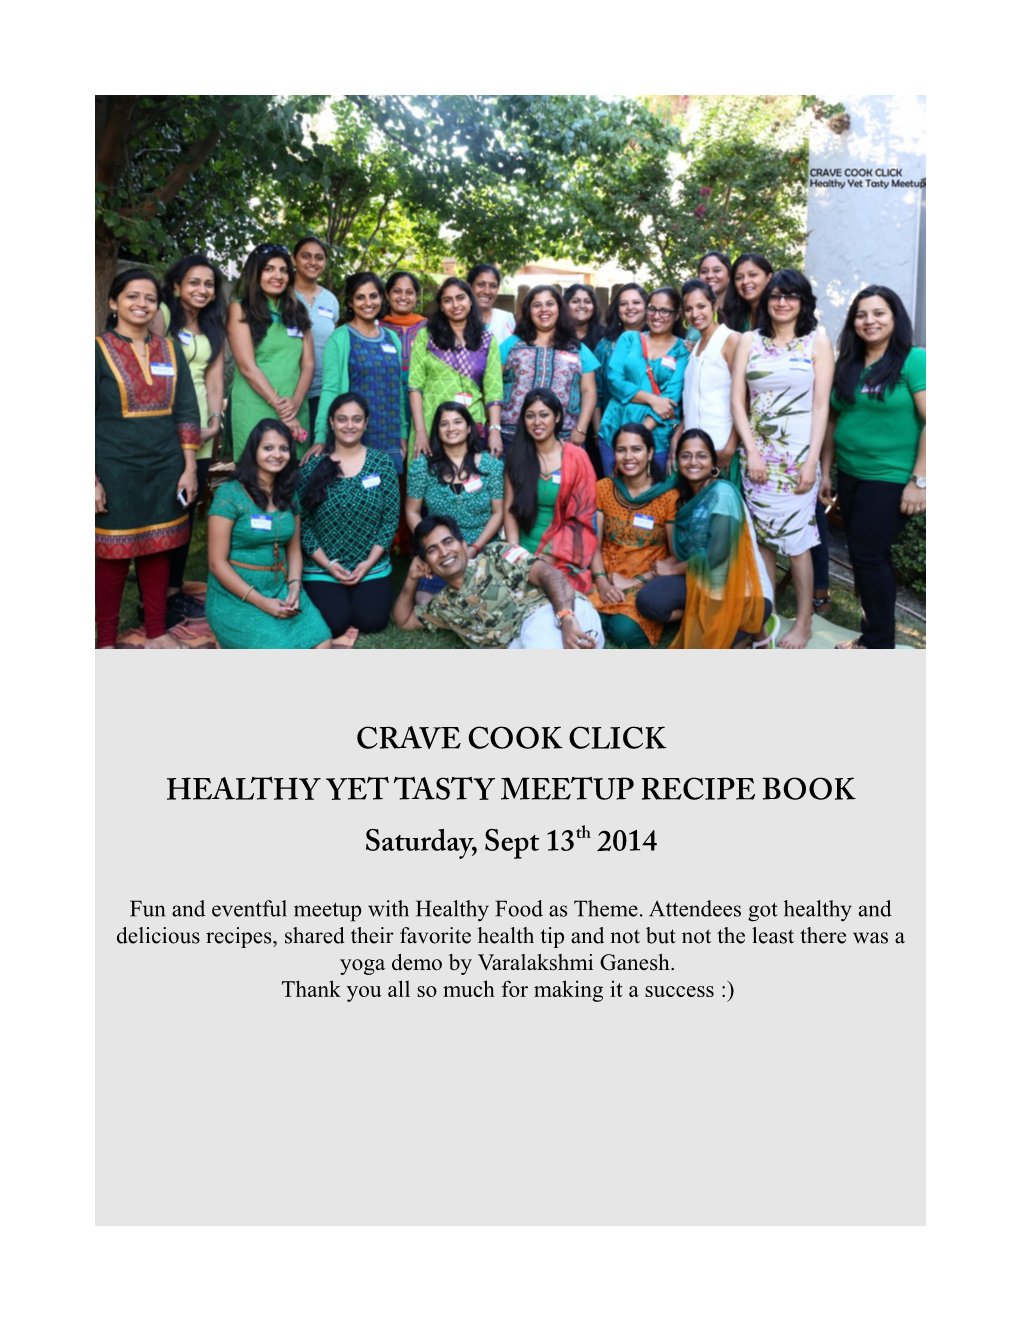 CRAVE COOK CLICK HEALTHY YET TASTY MEETUP RECIPE BOOK Th Saturday, Sept 13 2014